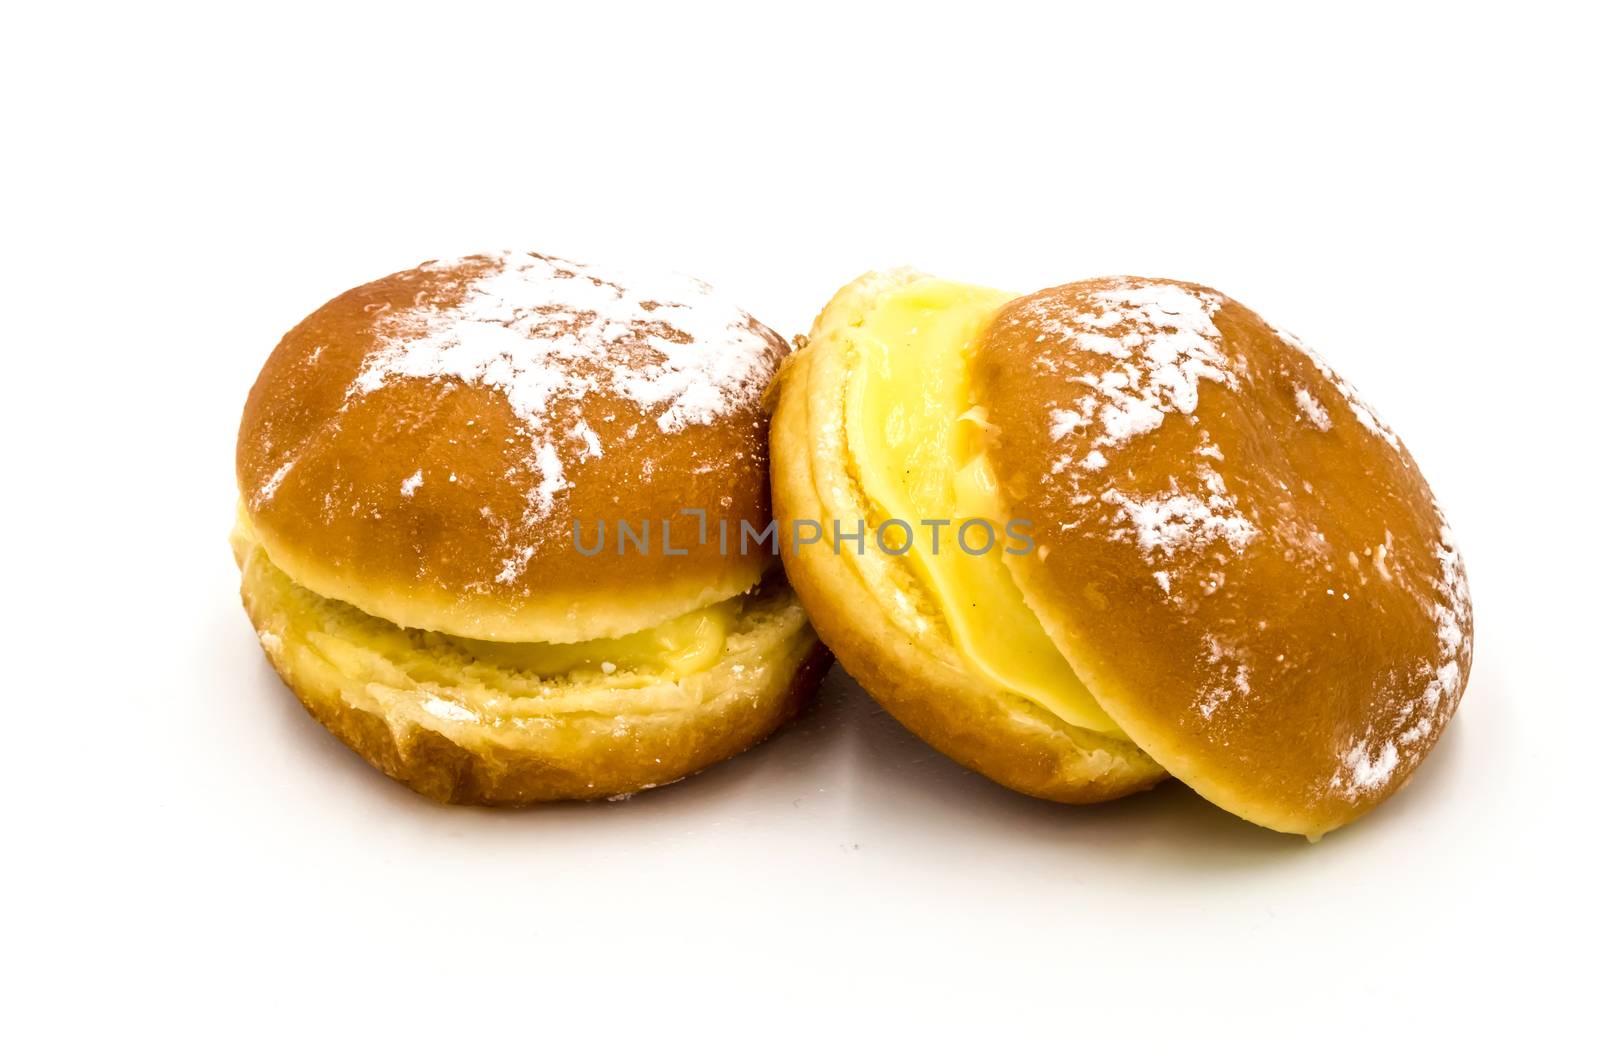 Bola de Berlim, or Berlim Ball, a Portuguese pastry made from a  by Philou1000